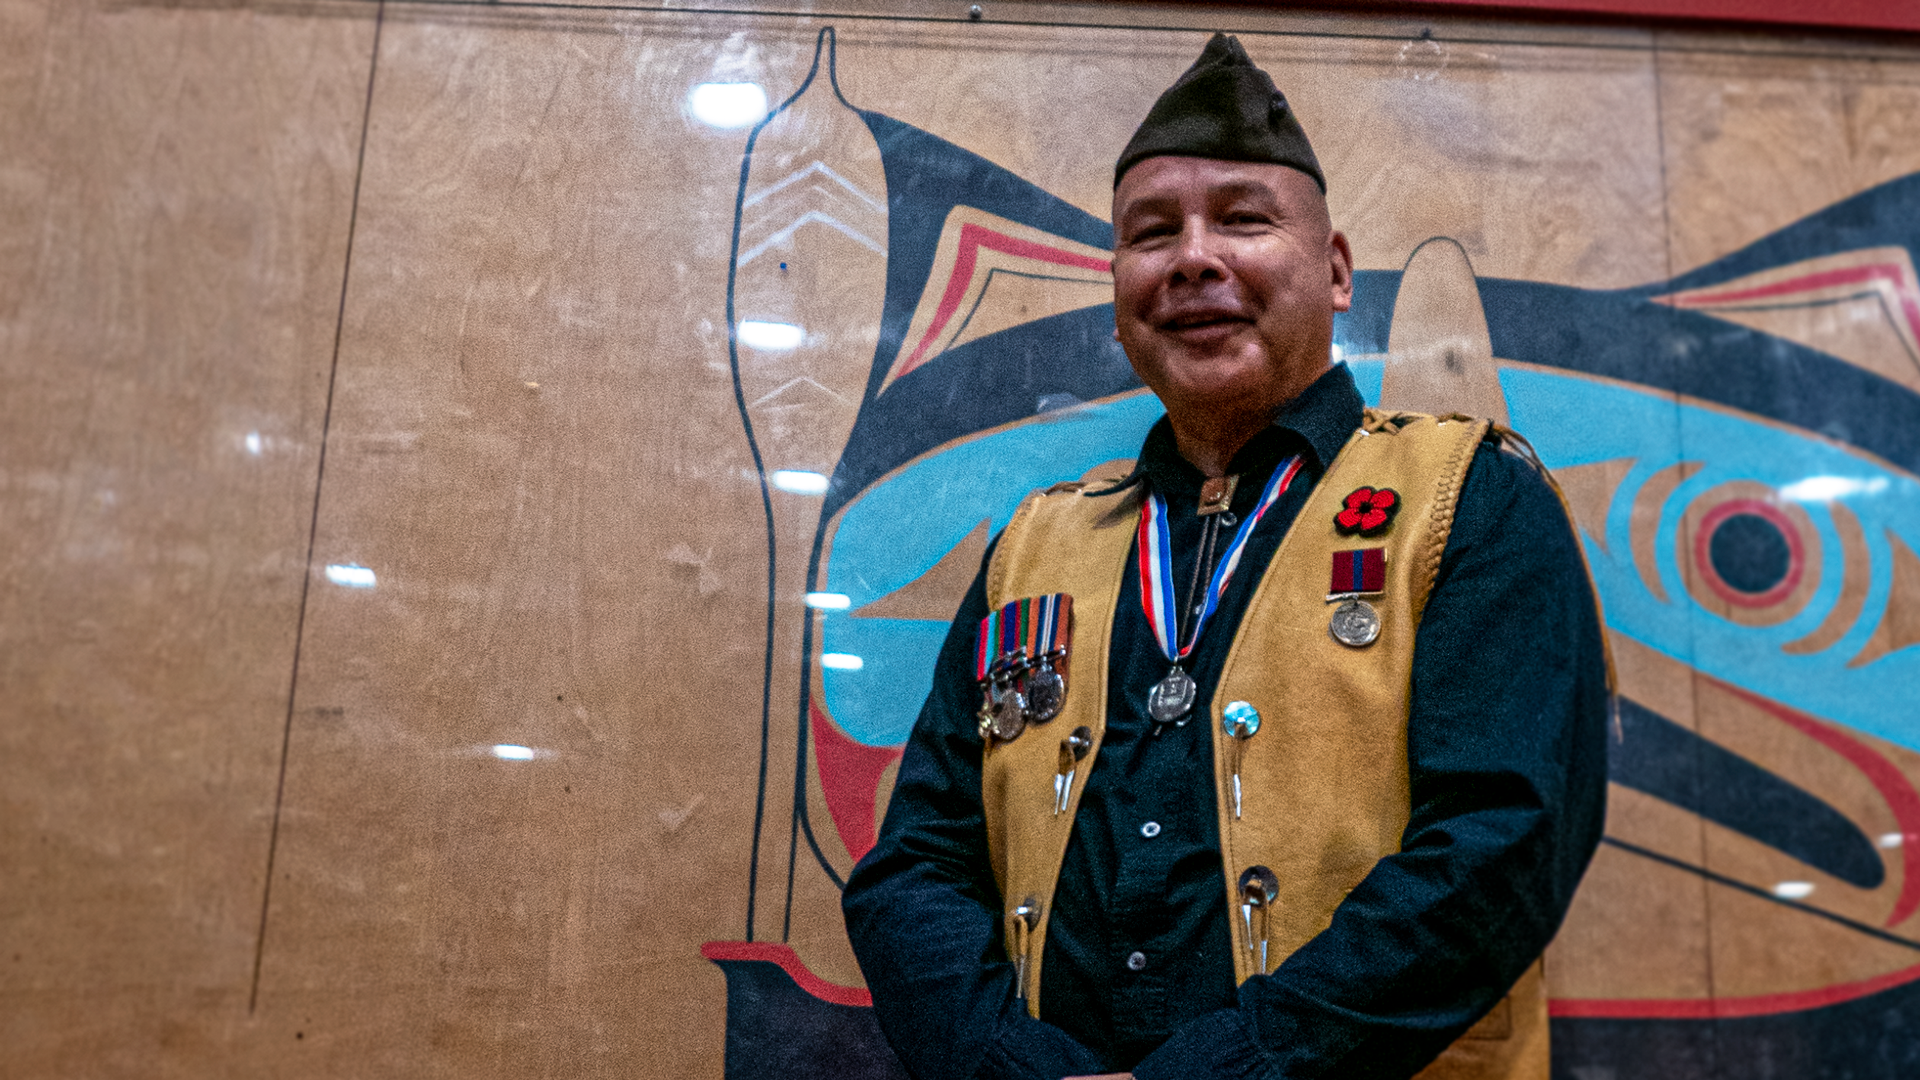 A man in a vest and military cap smiles at the camera, standing in front of a community centre wall decorated in Indigenous art. He is wearing military pins and medals and a poppy pin over his heart.